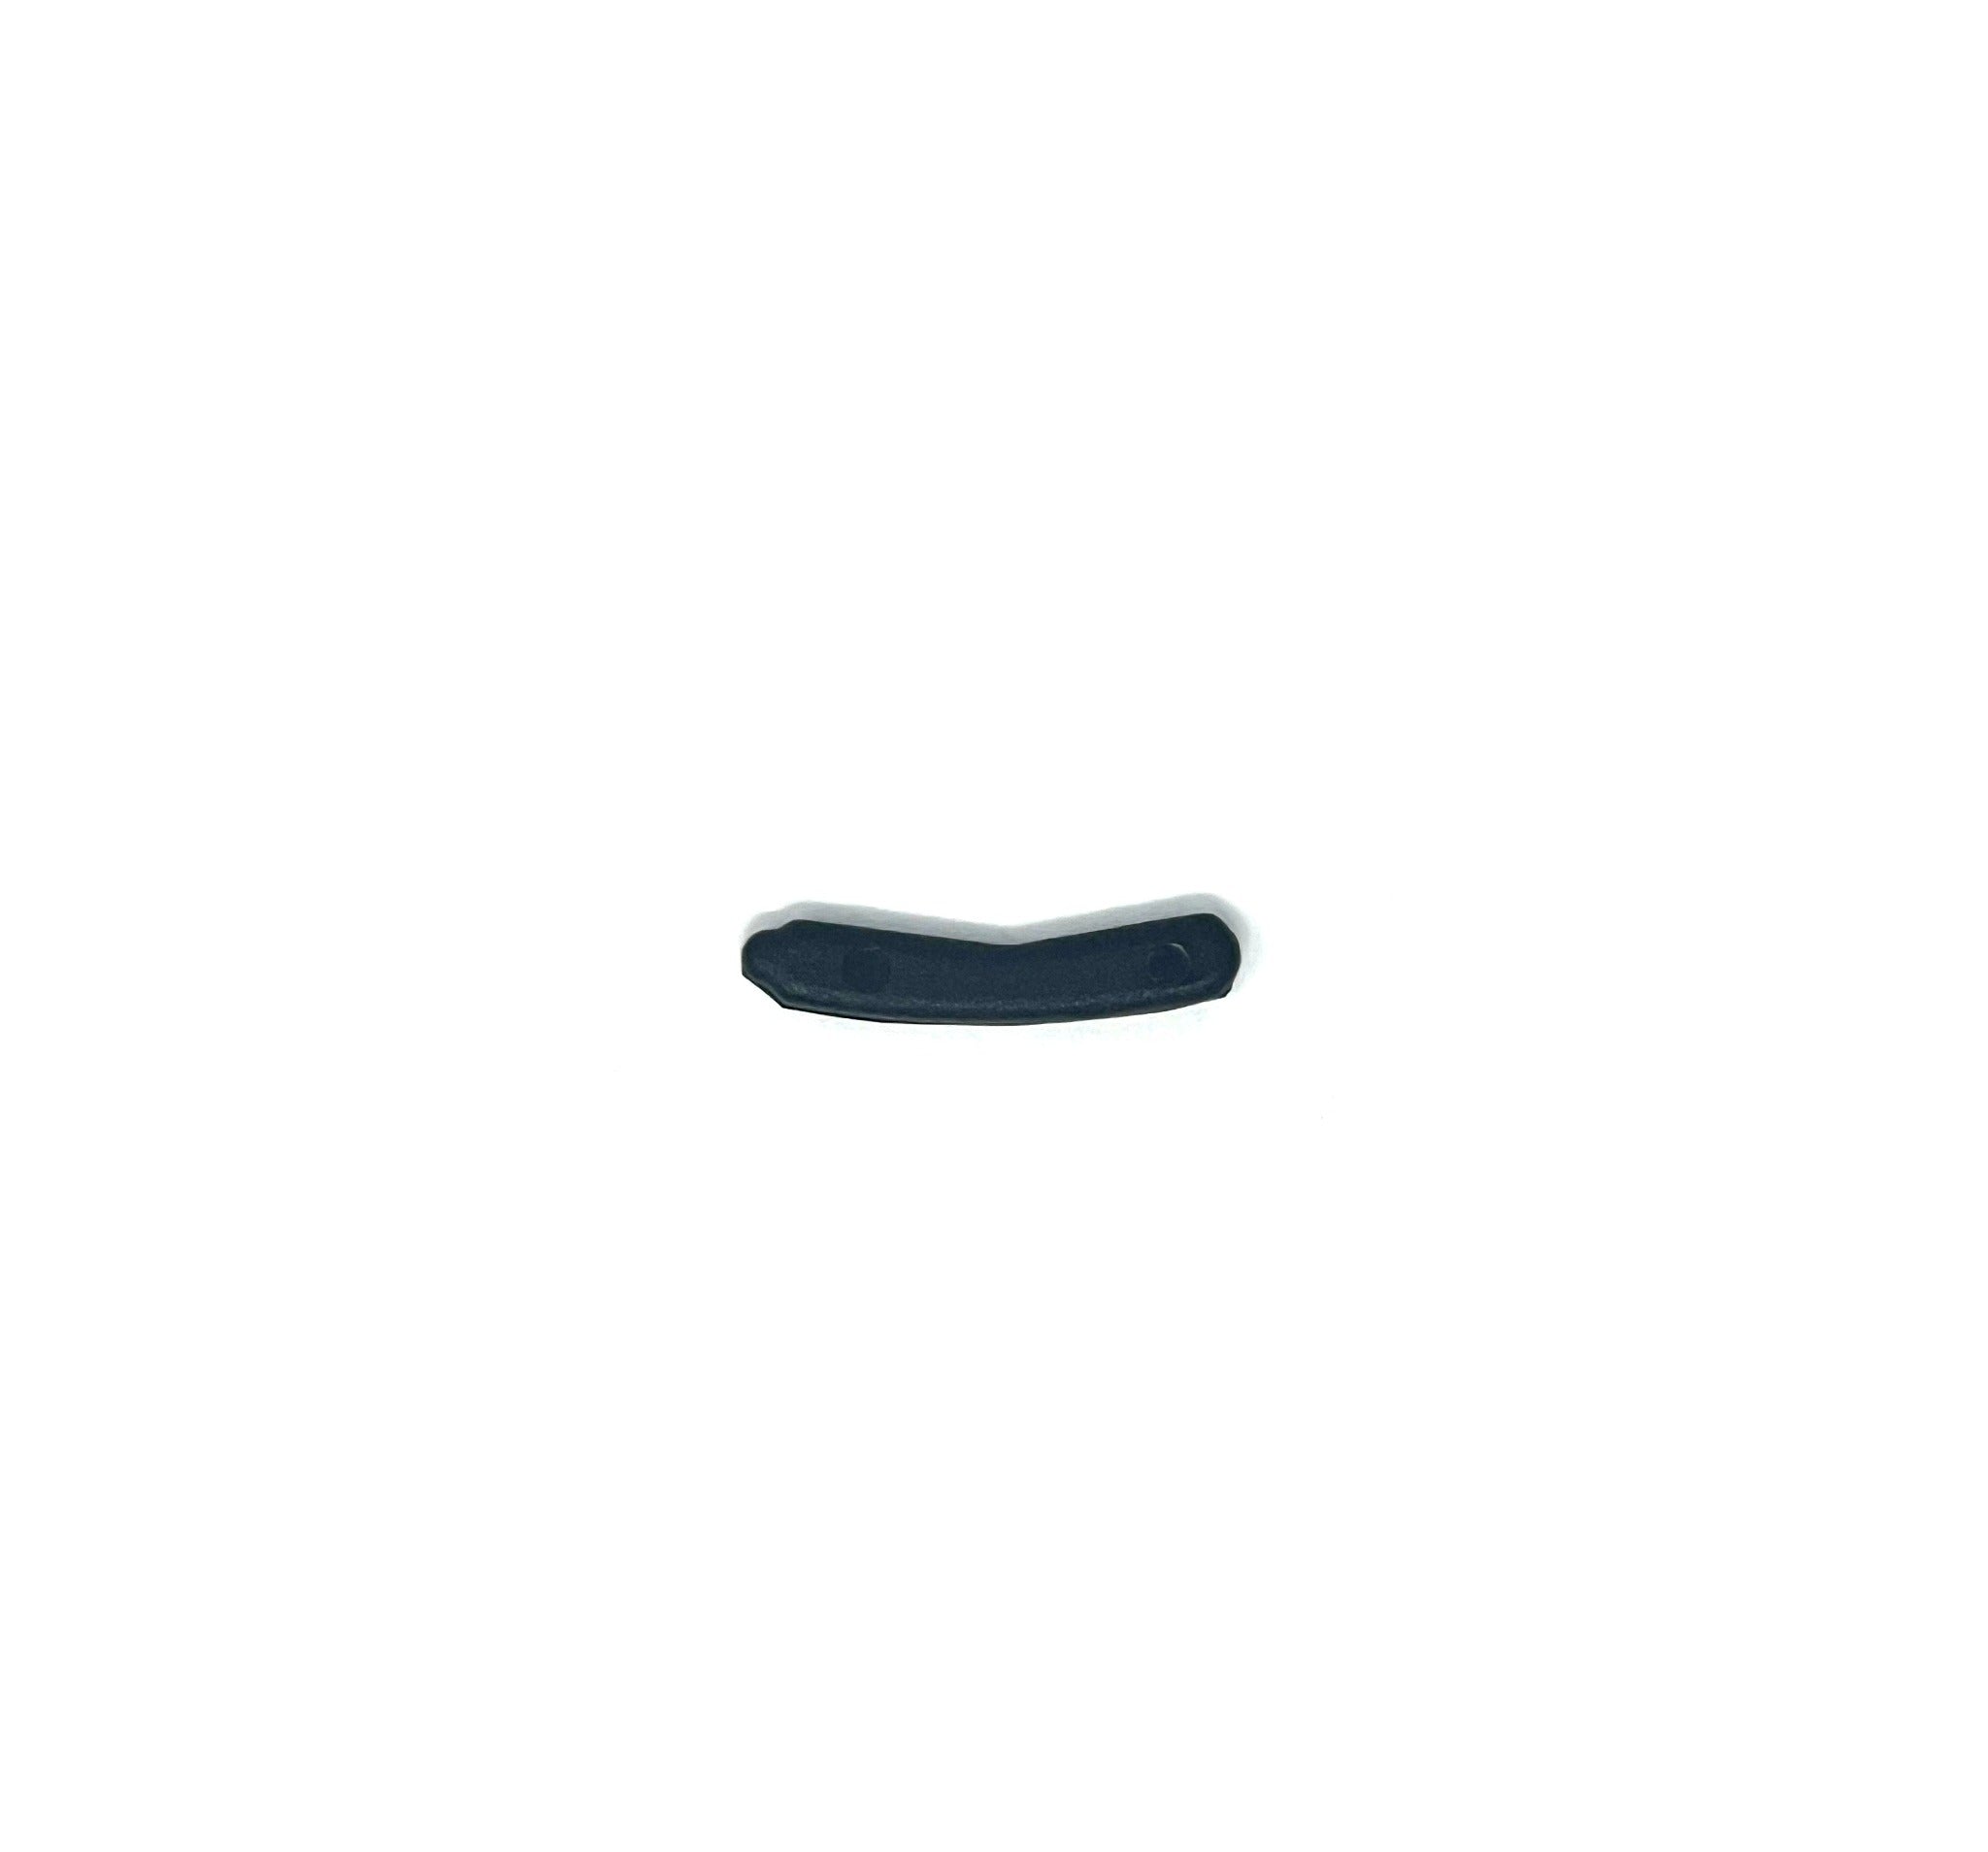 Tail Insert for Metal Head 329G95A 5pk